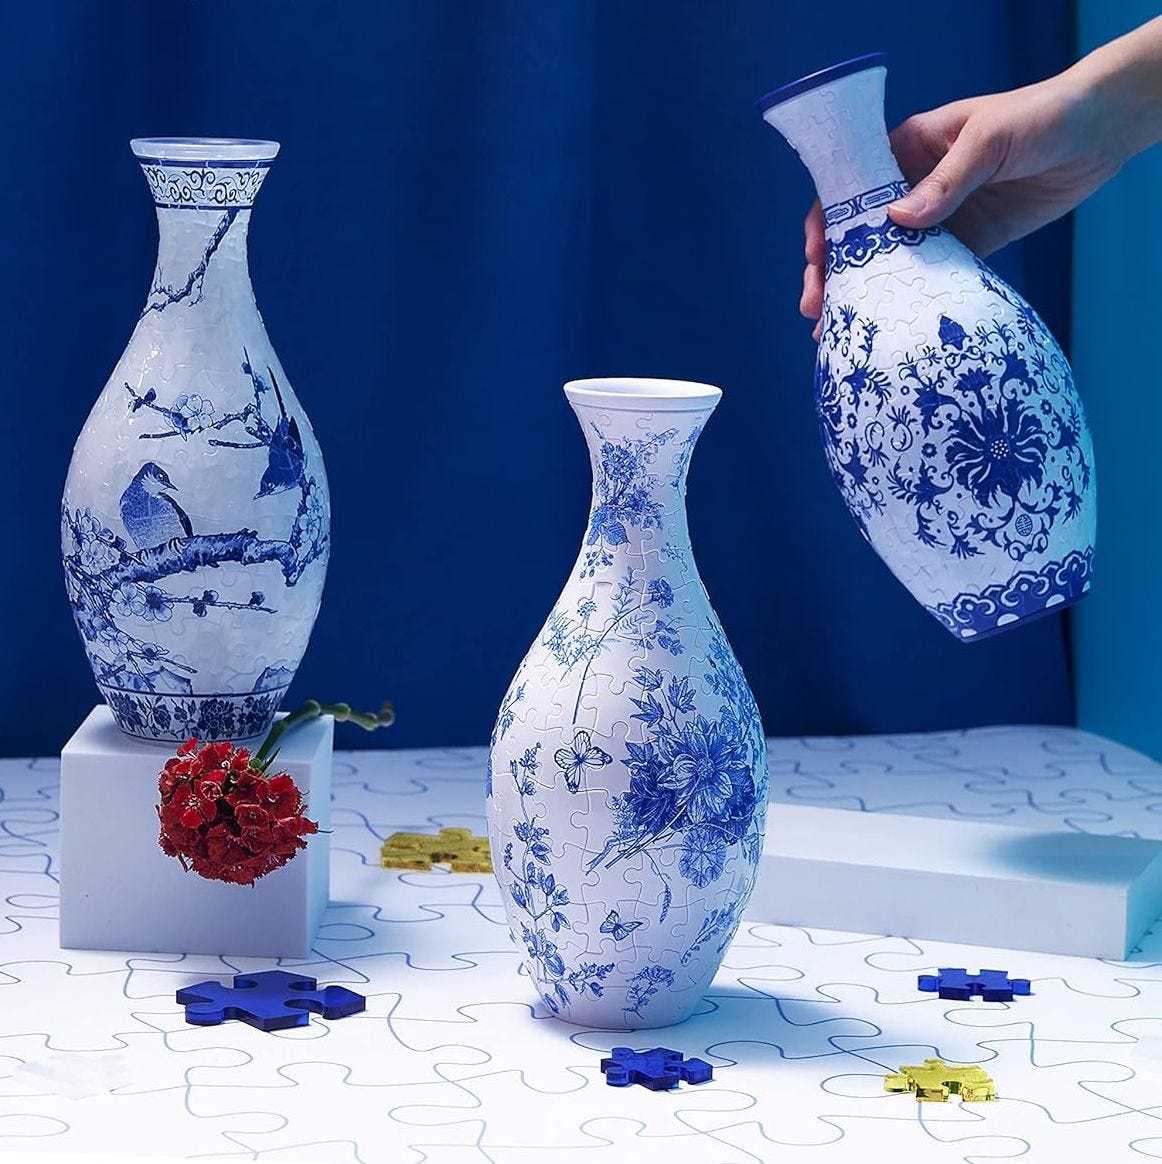 Craft Lovers Are Obsessed With These Viral Puzzle Vases on Amazon